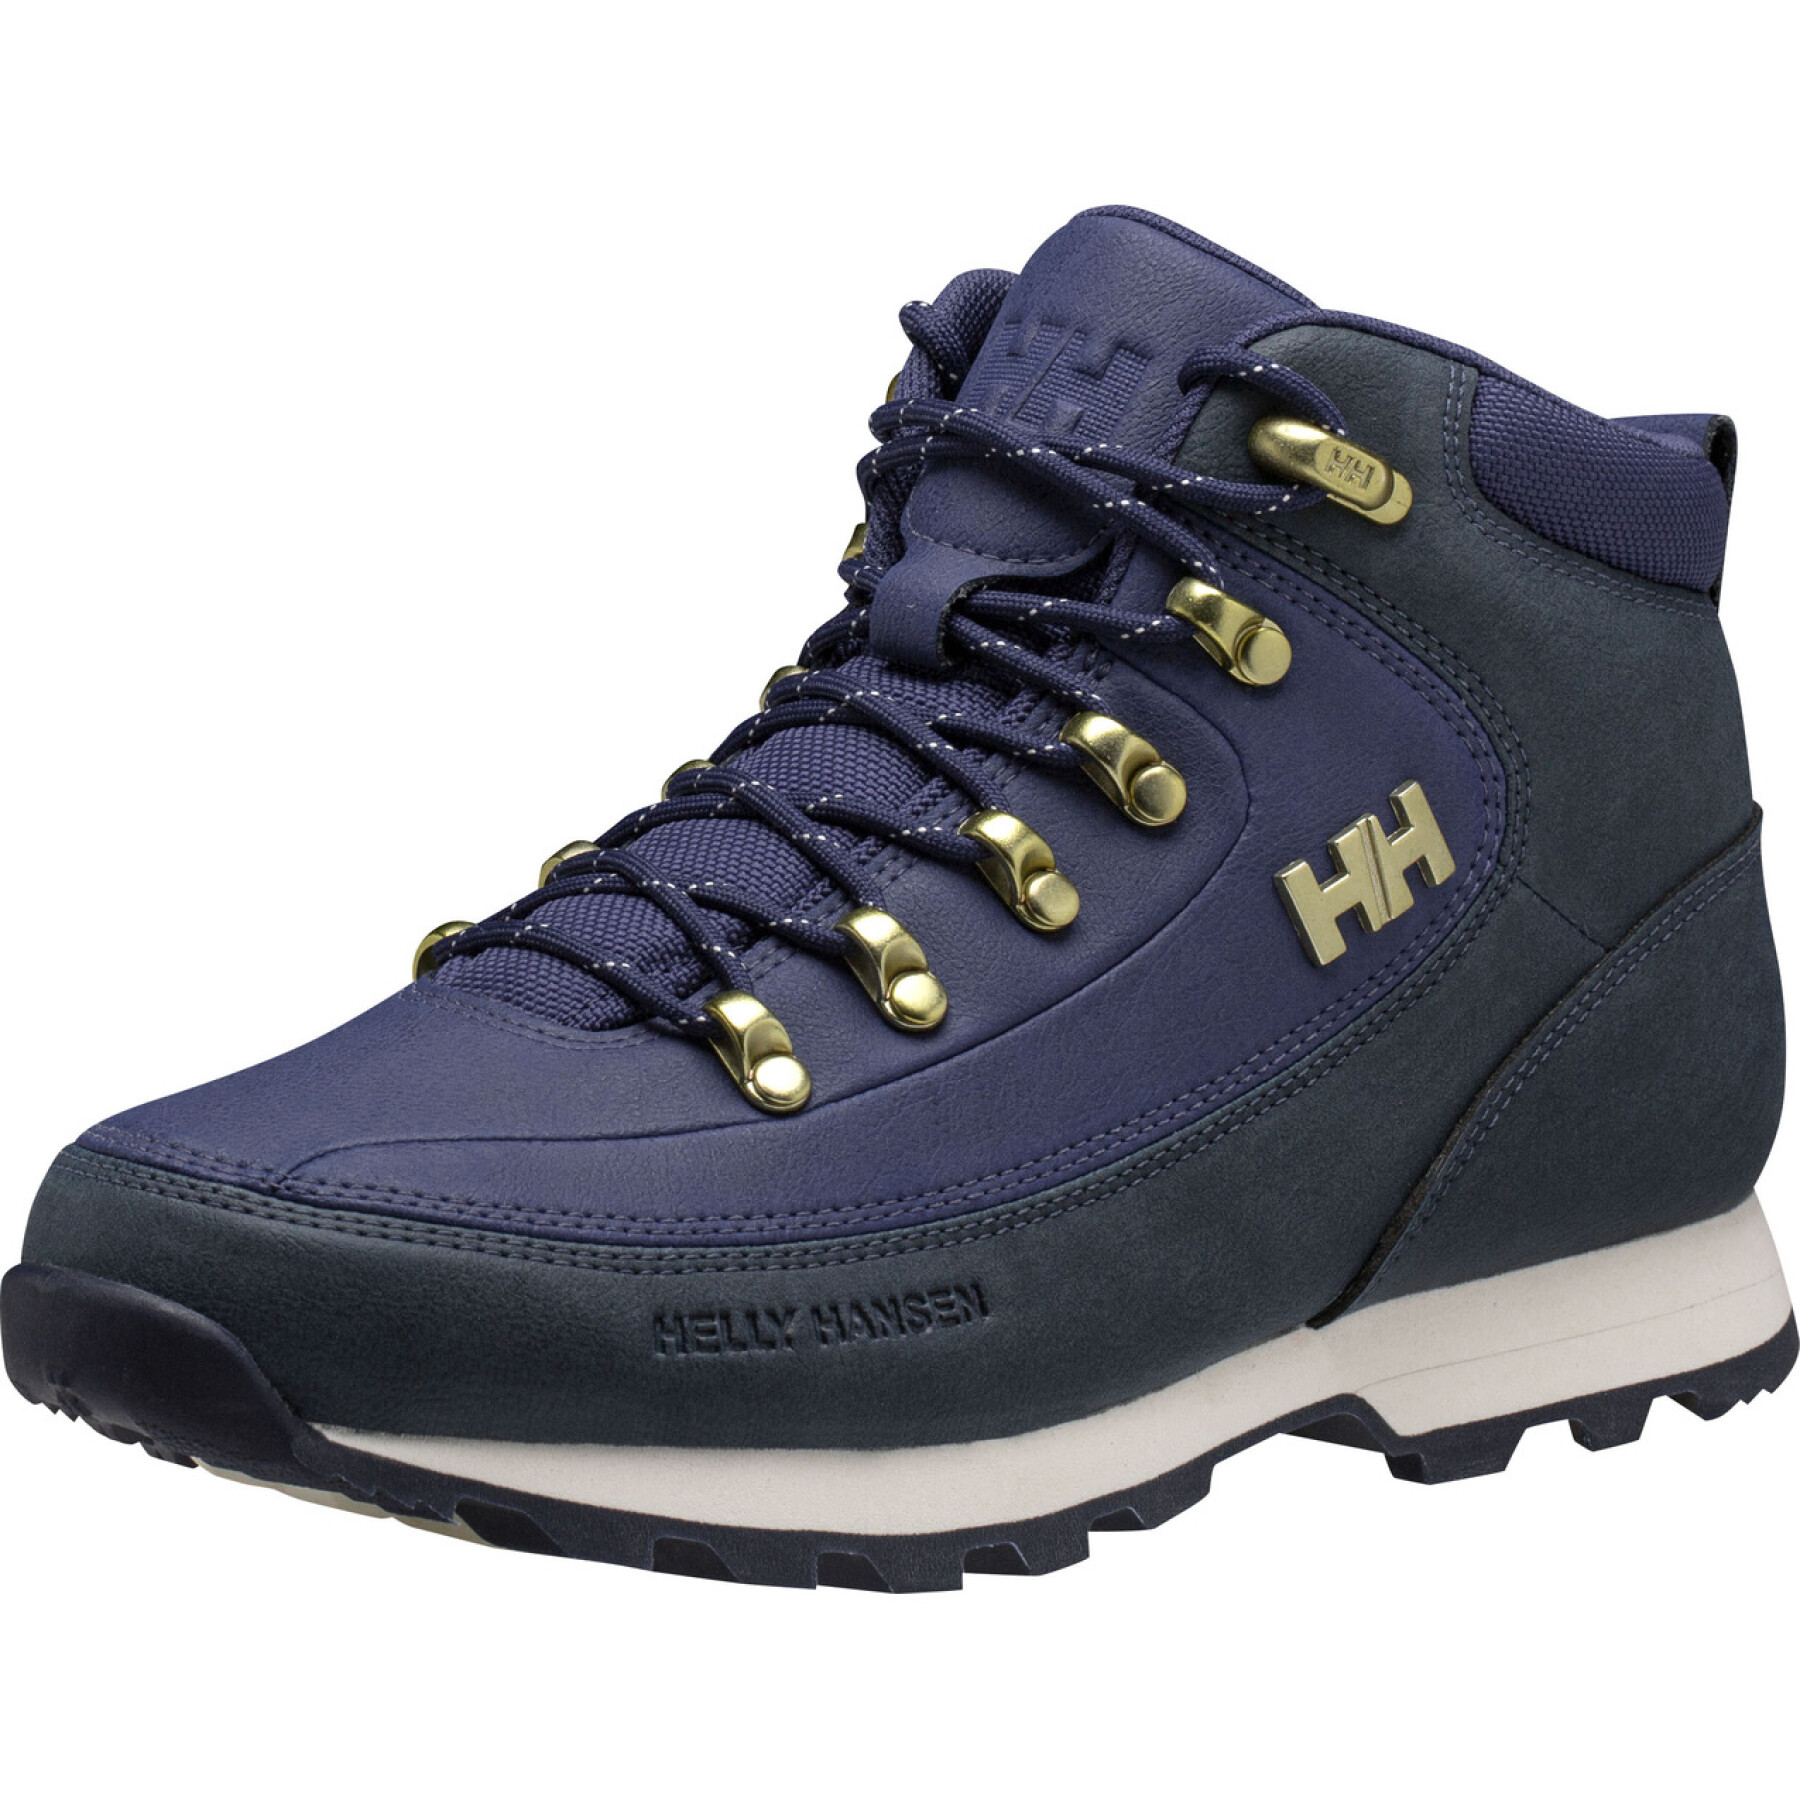 Women's hiking shoes Helly Hansen the forester